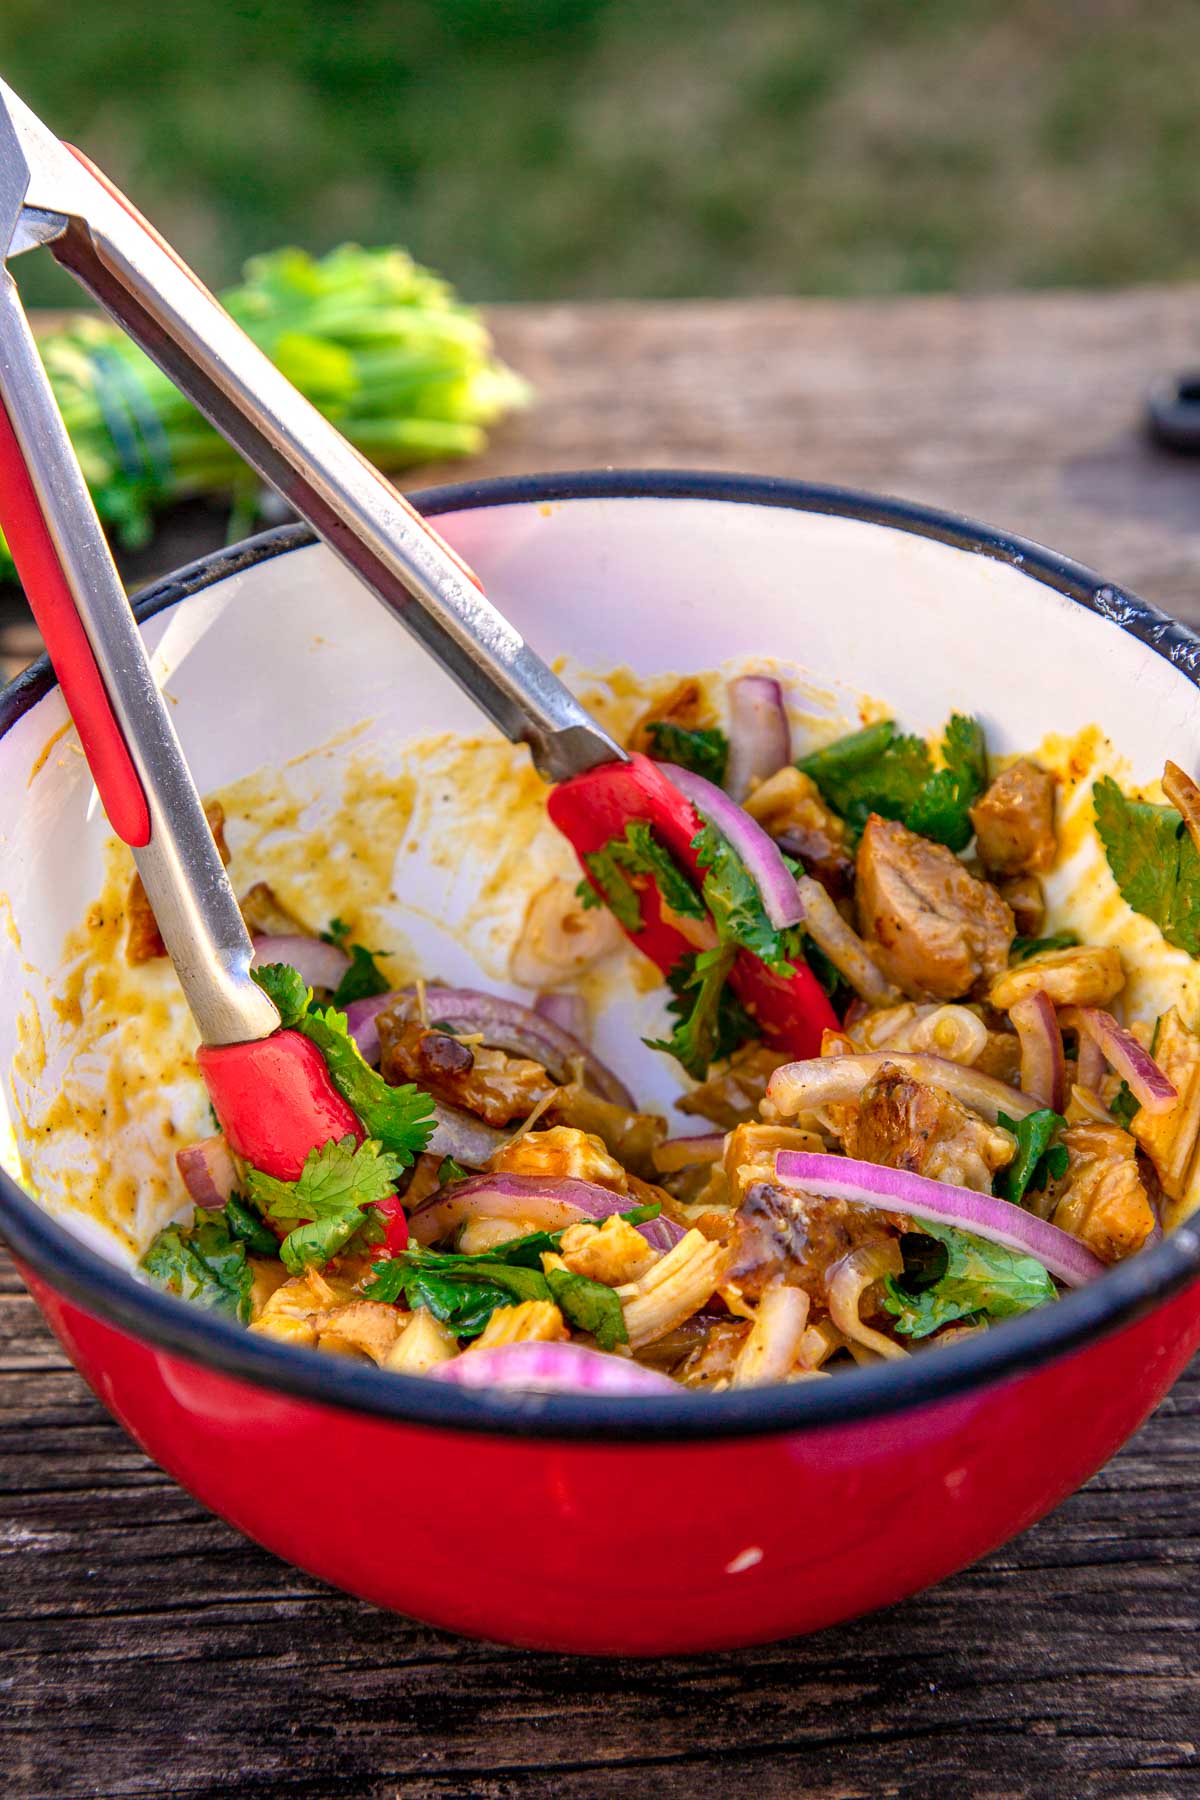 A red bowl full of BBQ sauced chicken, red onion, and cilantro. A pair of red tongs are resting in the bowl.